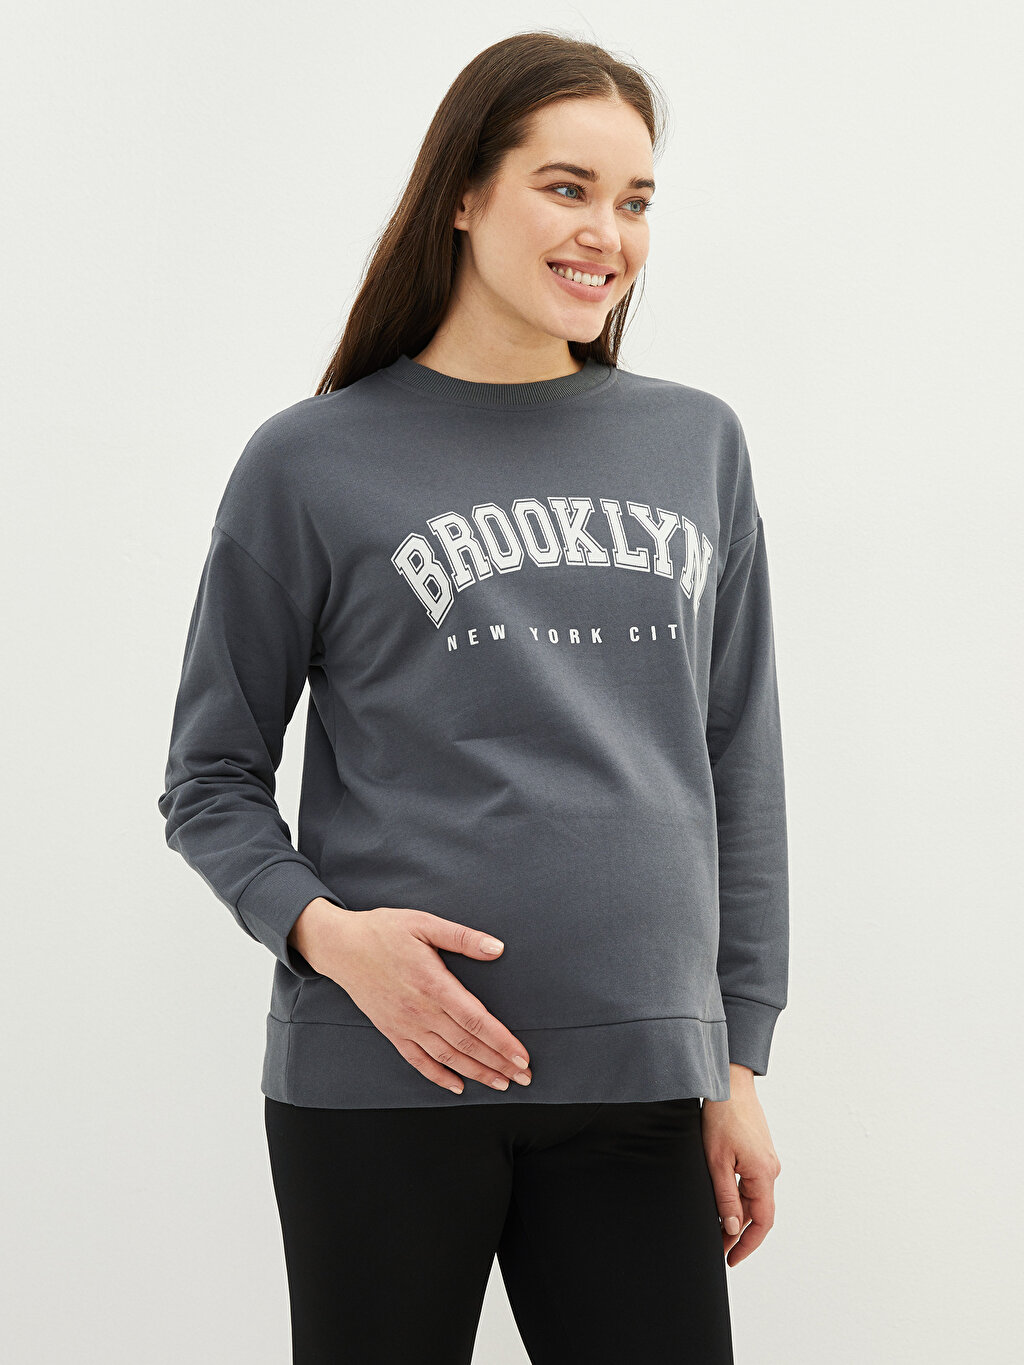 Crew Neck Letter Printed Long Sleeve Maternity Sweatshirt -S2FQ17Z8-HLC -  S2FQ17Z8-HLC - LC Waikiki